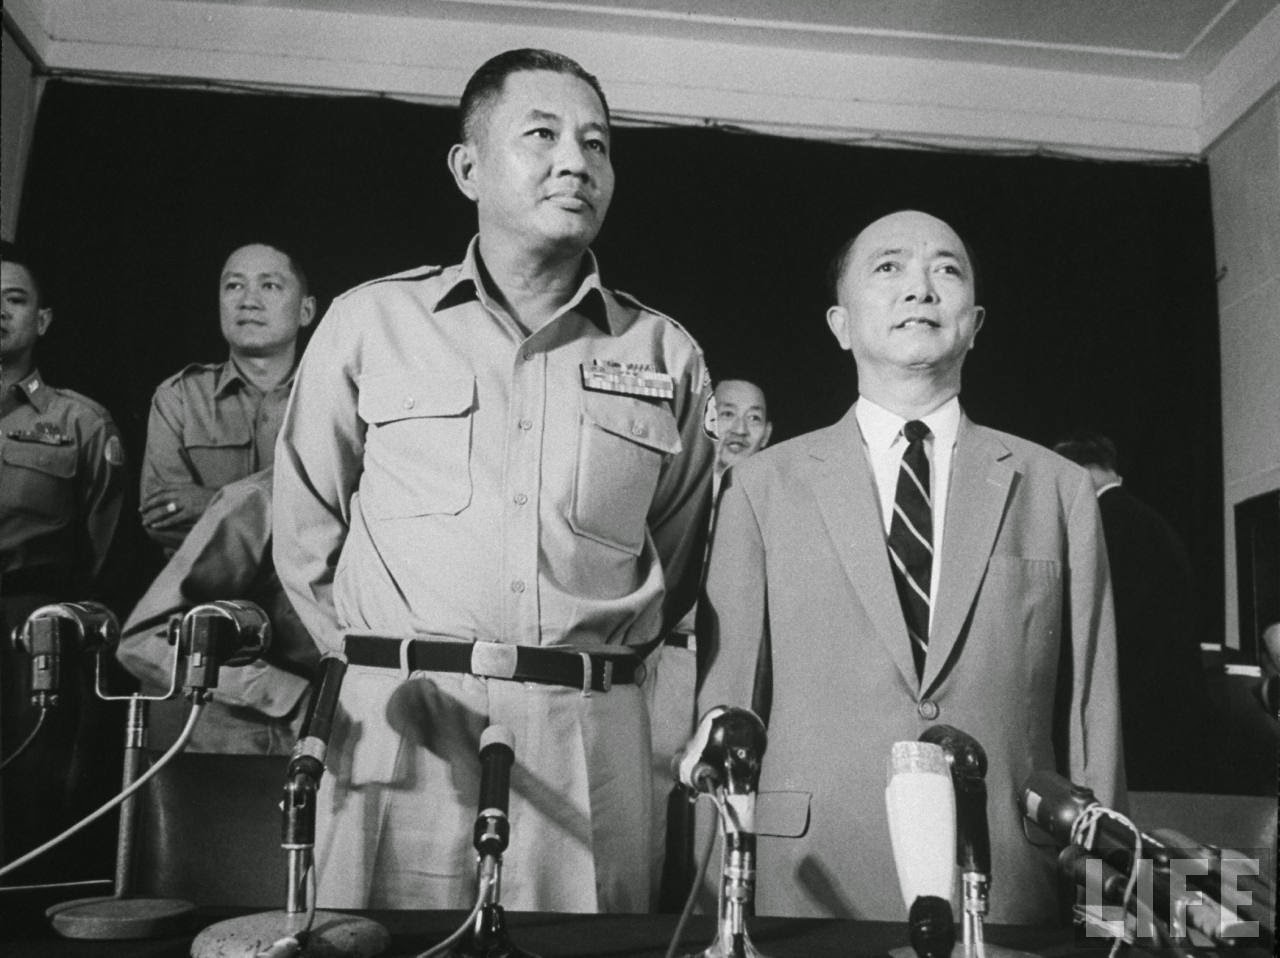 209-2-11-1963-major-general-co-leader-of-military-coup-that-overthrew-diem-regime-van-minh-duong-l-with-new-prime-minister-nguyen-ngoc-tho-r